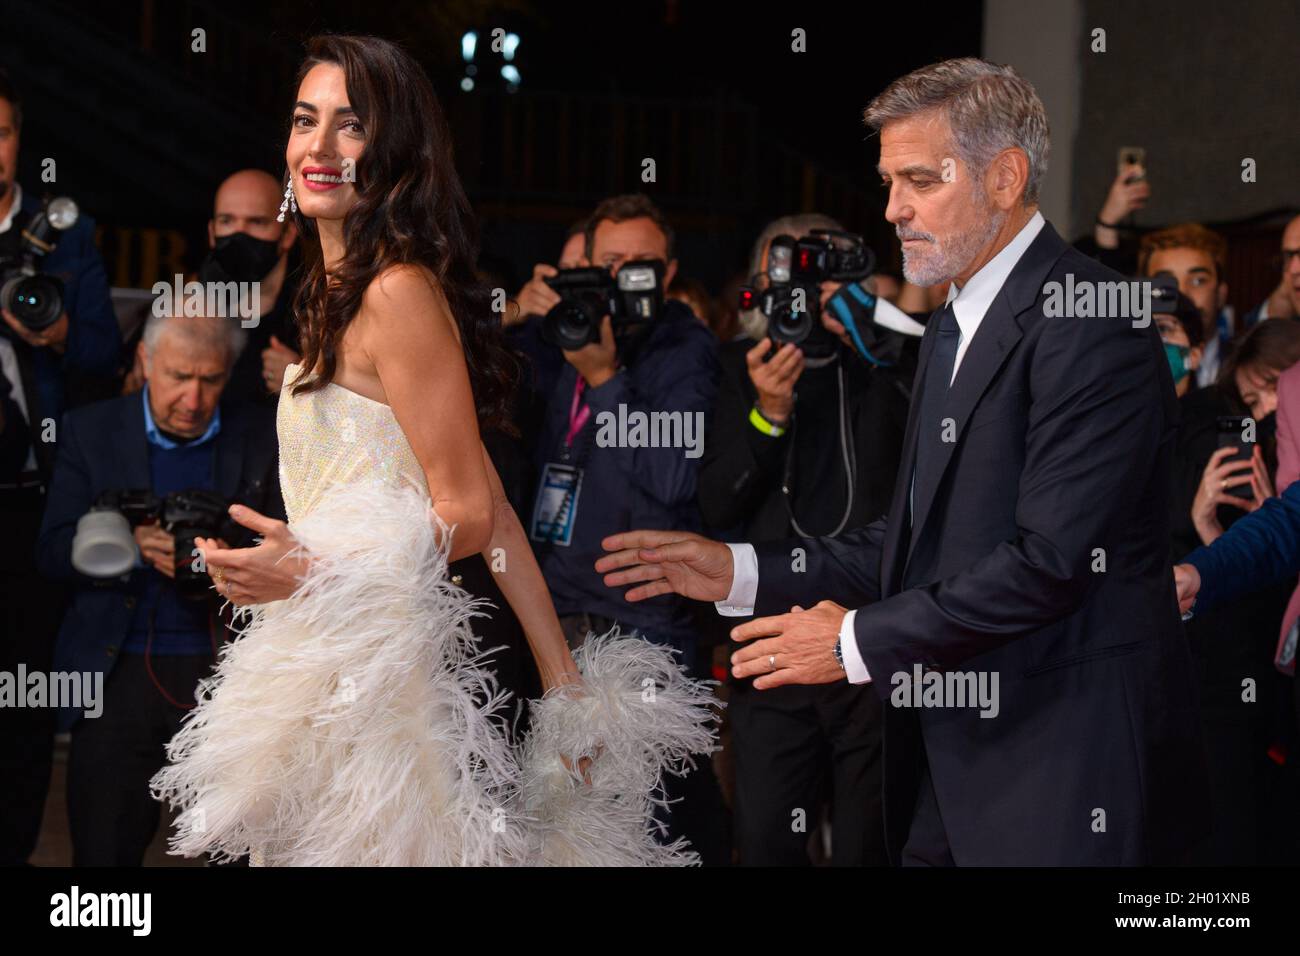 London, UK. 10 October 2021. George Clooney and wife Amal Clooney arrive for the UK premiere of 'The Tender Bar', at the Royal Festival Hall in London during the BFI London Film Festival Picture date: Sunday October 10, 2021. Photo credit should read: Matt Crossick/Empics/Alamy Live News Stock Photo